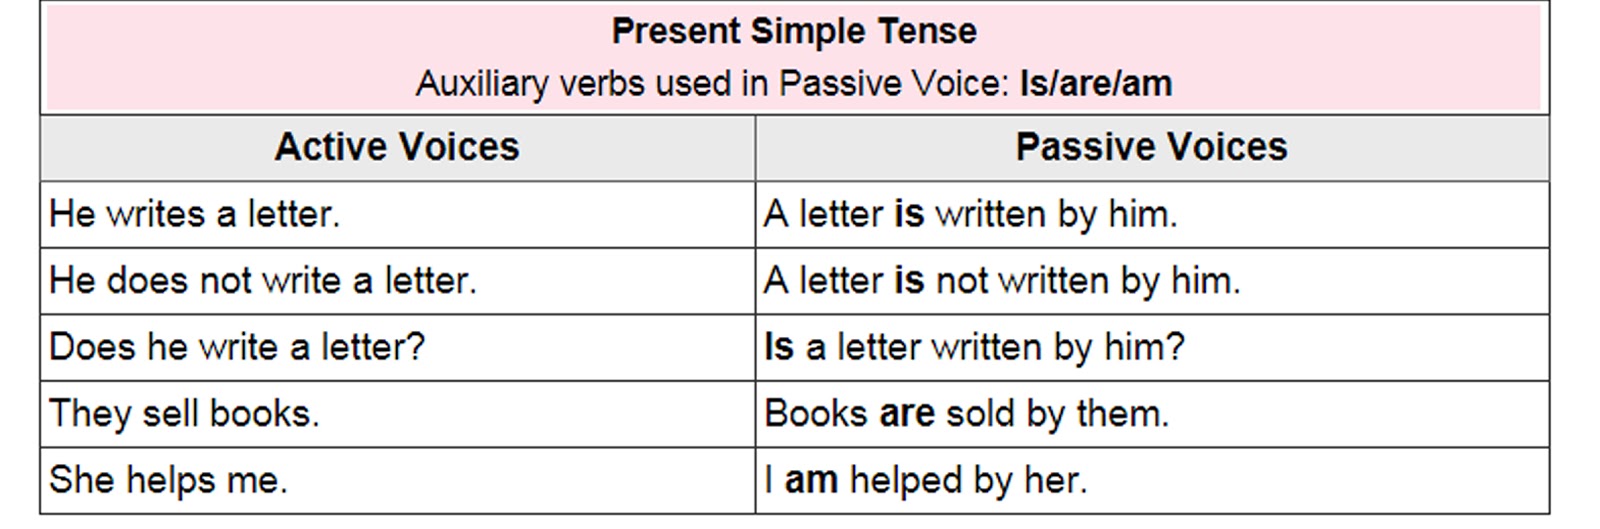 Simple Present Tense Active Voice And Passive Voice Example